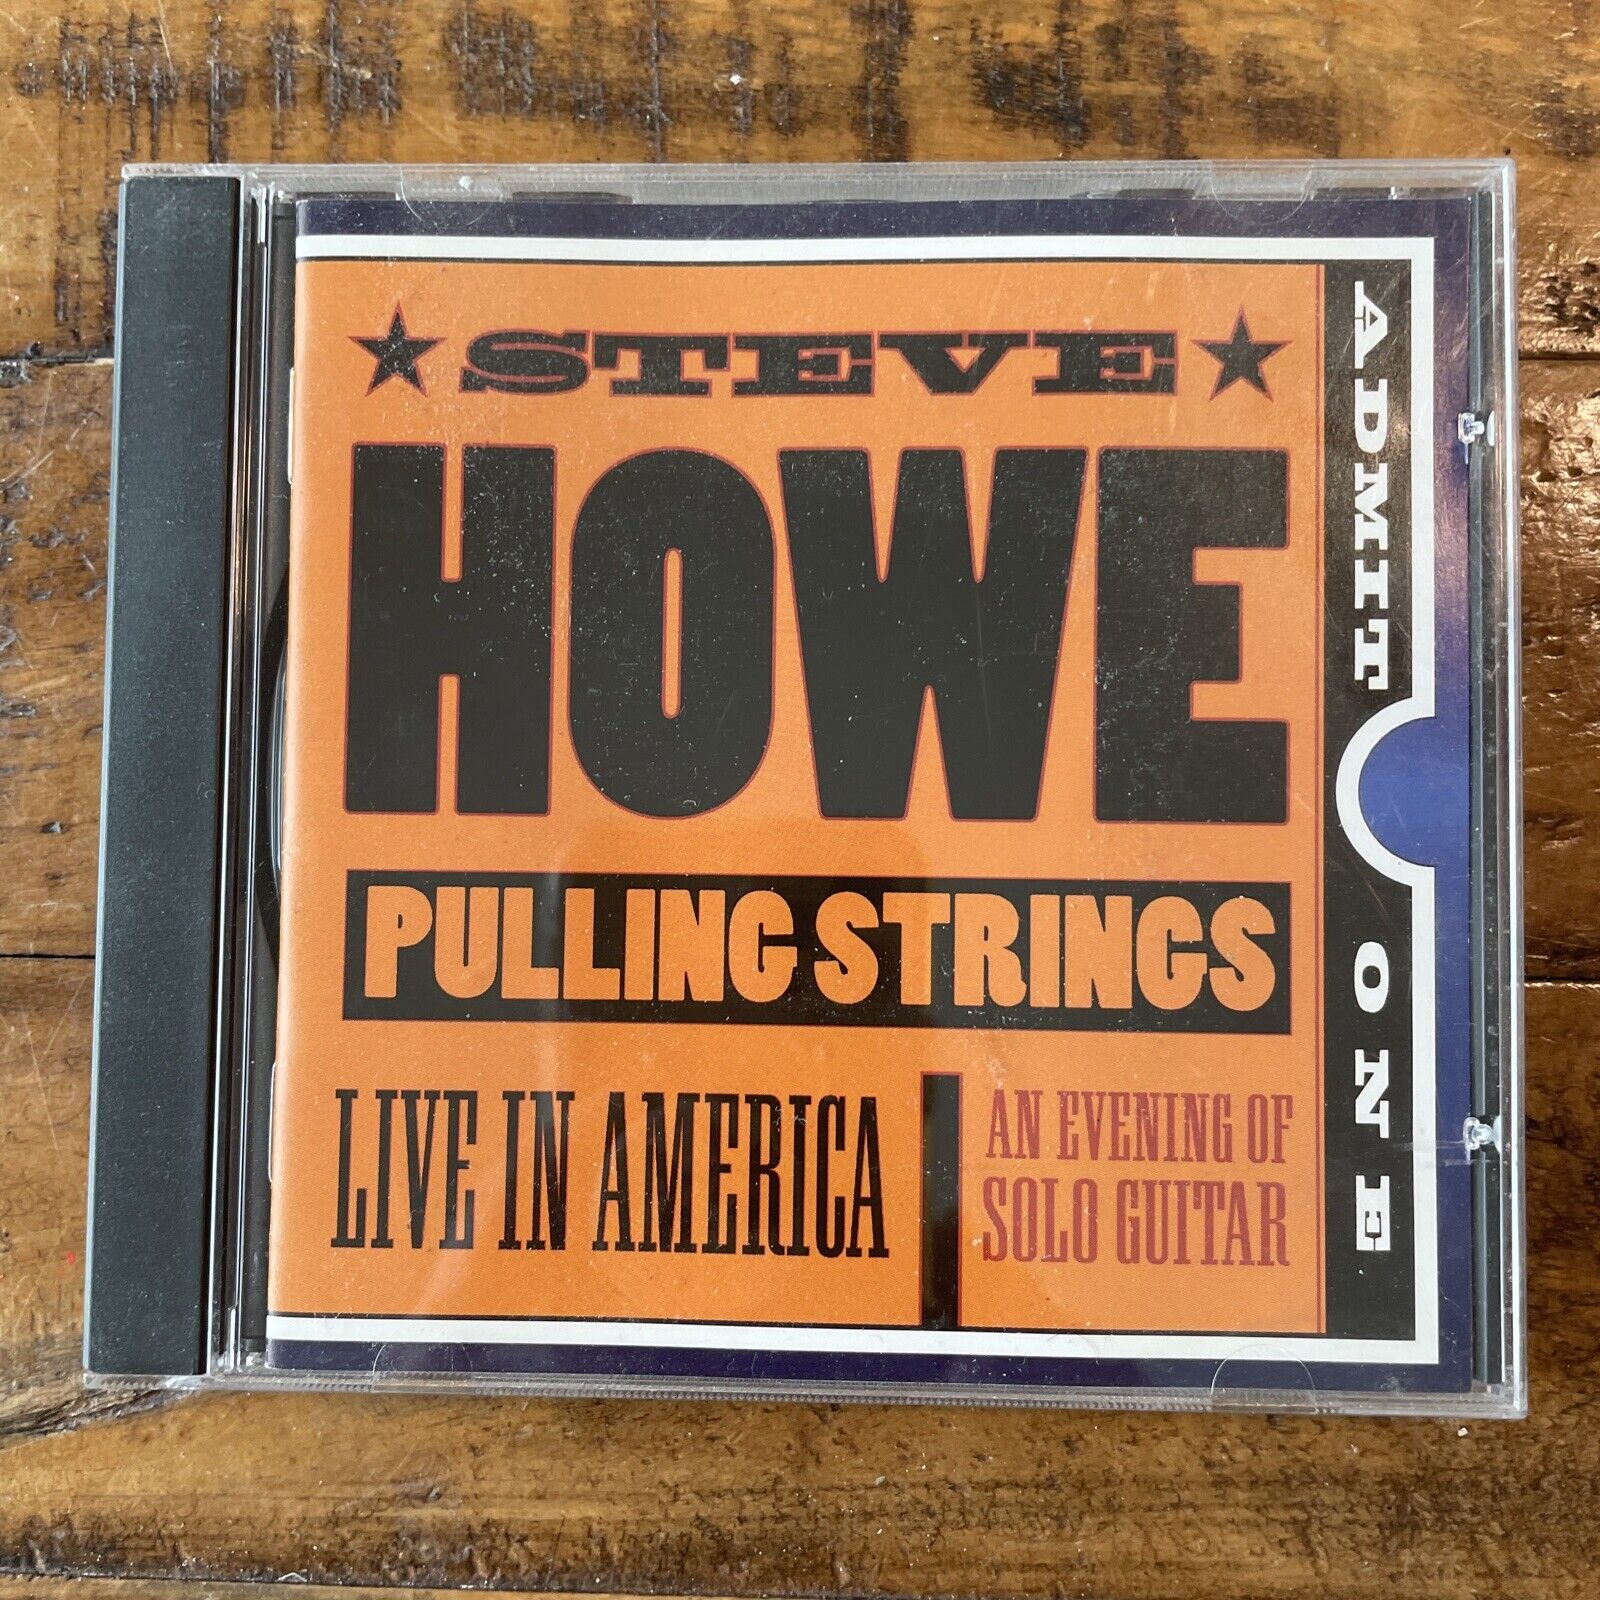 Steve Howe Pulling Strings Live In America An Evening of Solo Guitar CD Exc